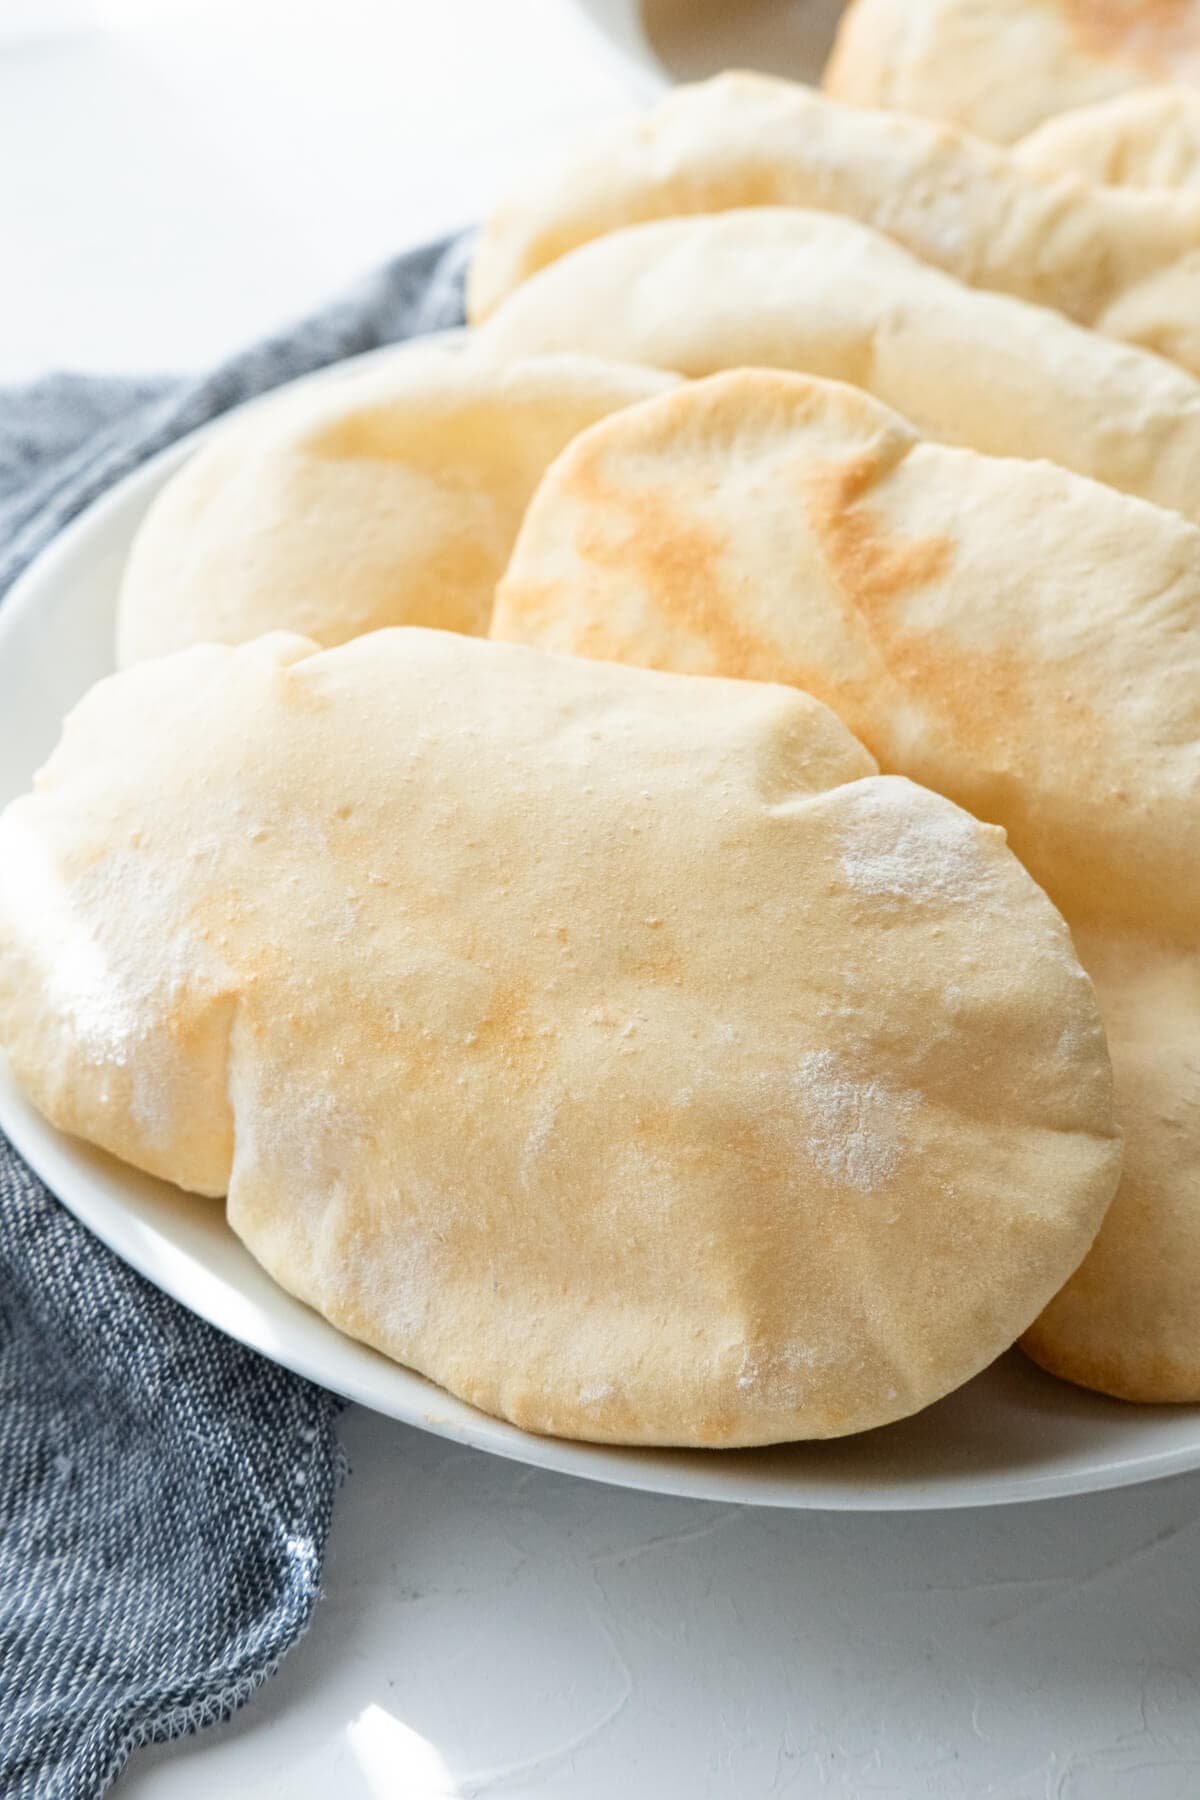 Puffy and soft pita bread. with a slightly browned crust.